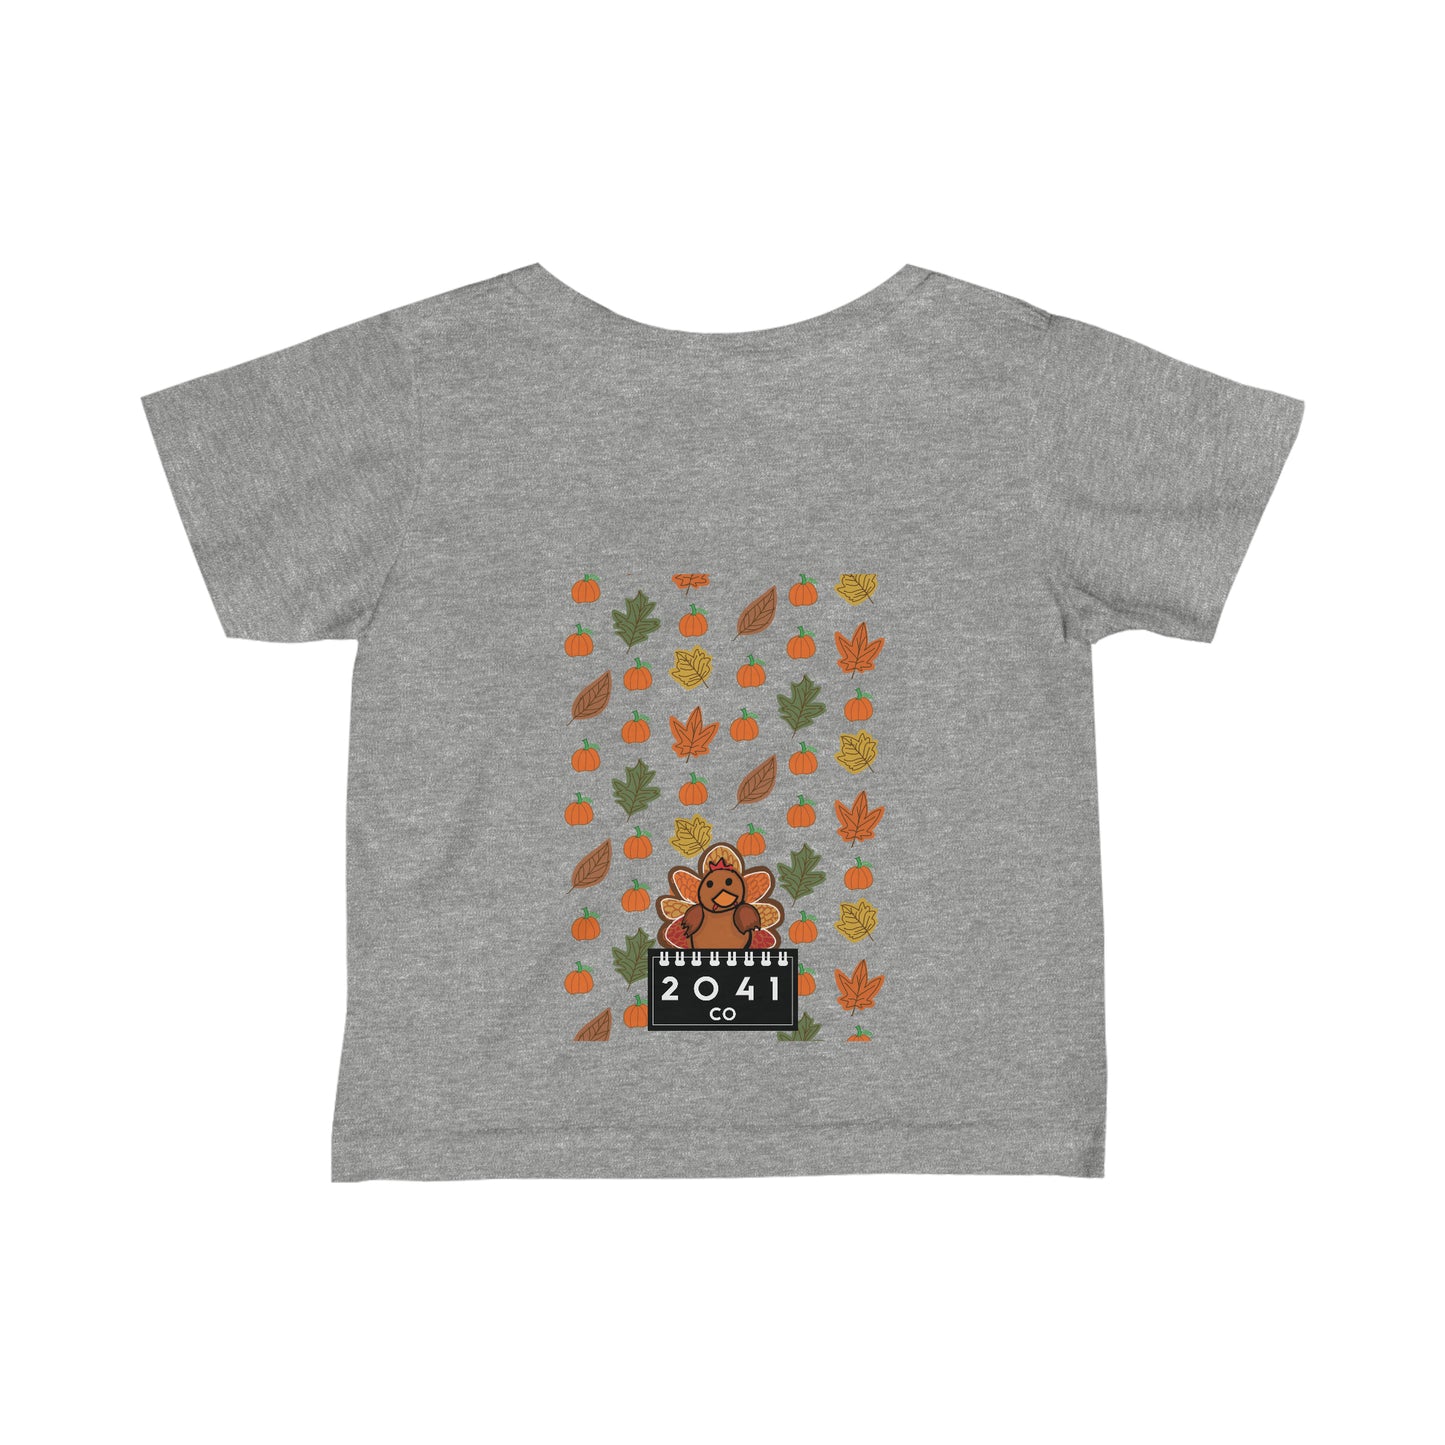 2041 CO INFANT HOLIDAY COTTOM T-SHIRT | THANKSGIVING